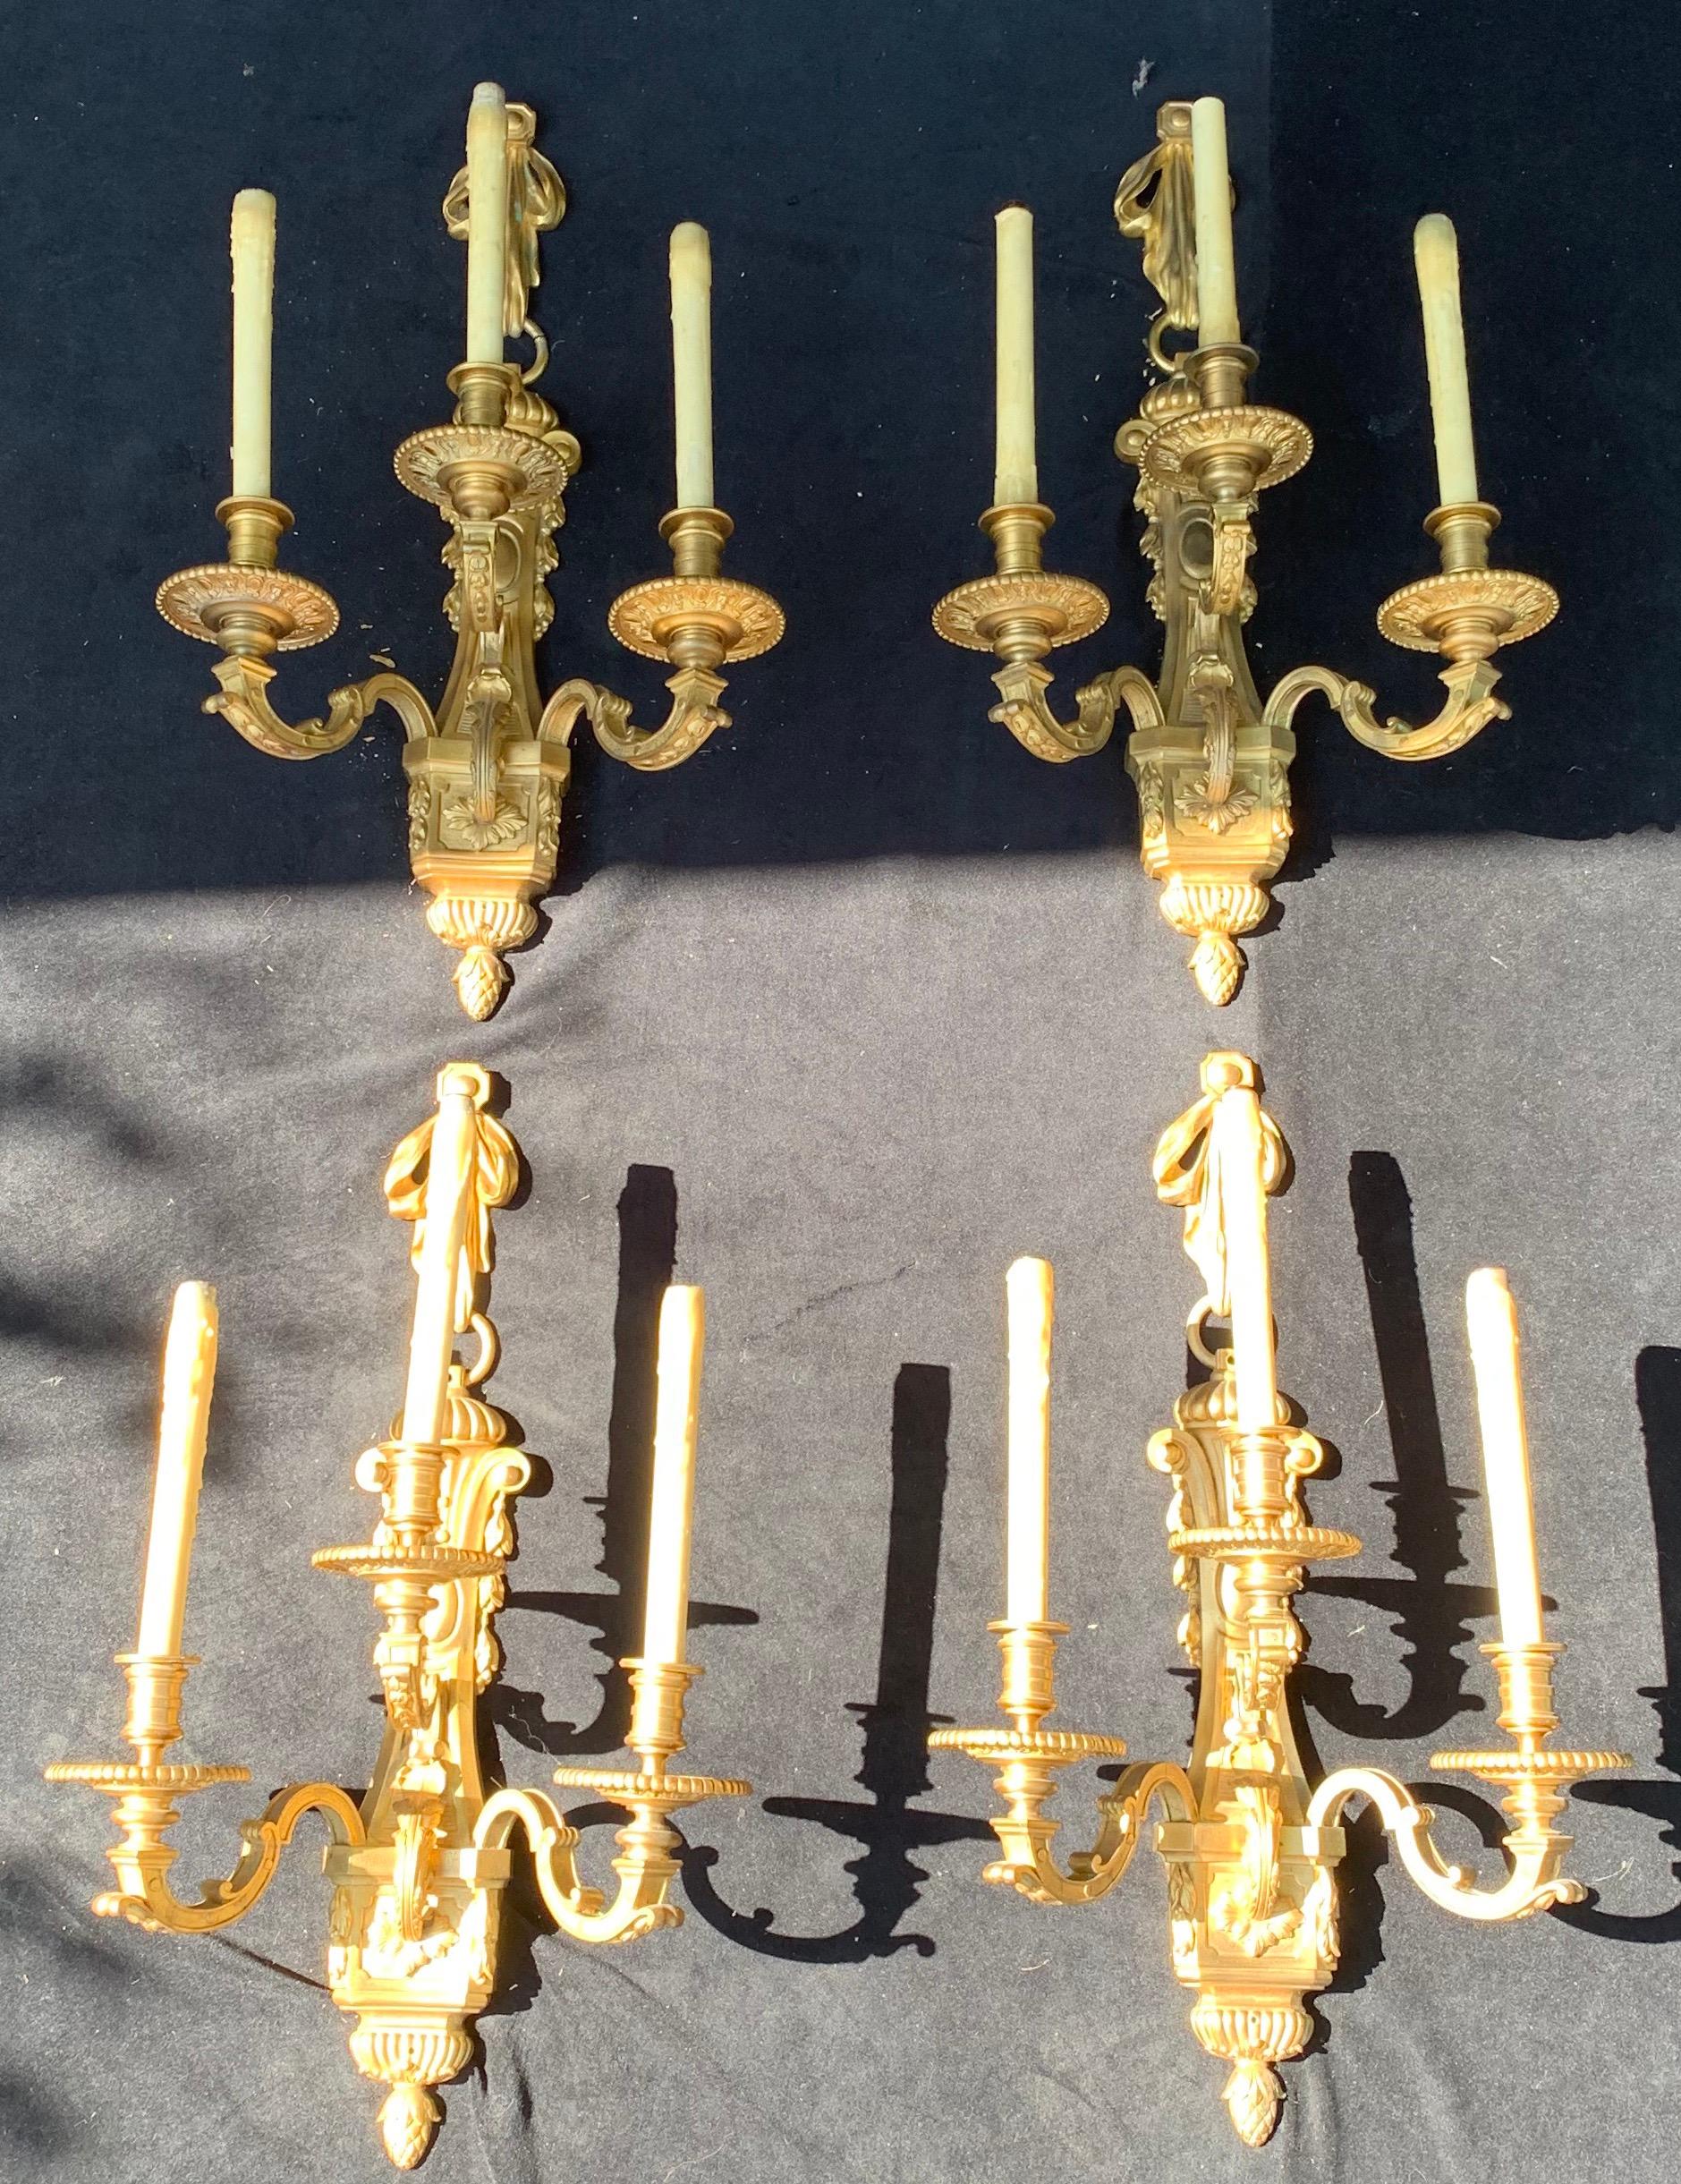 Incredible quality set of 4 large French doré bronze neoclassical style bow and tassel 3 candelabra sconces in the manner of Henri Vian
The set of four (two pair) came out of the same estate on the gold coast of long island where the Signed Henri